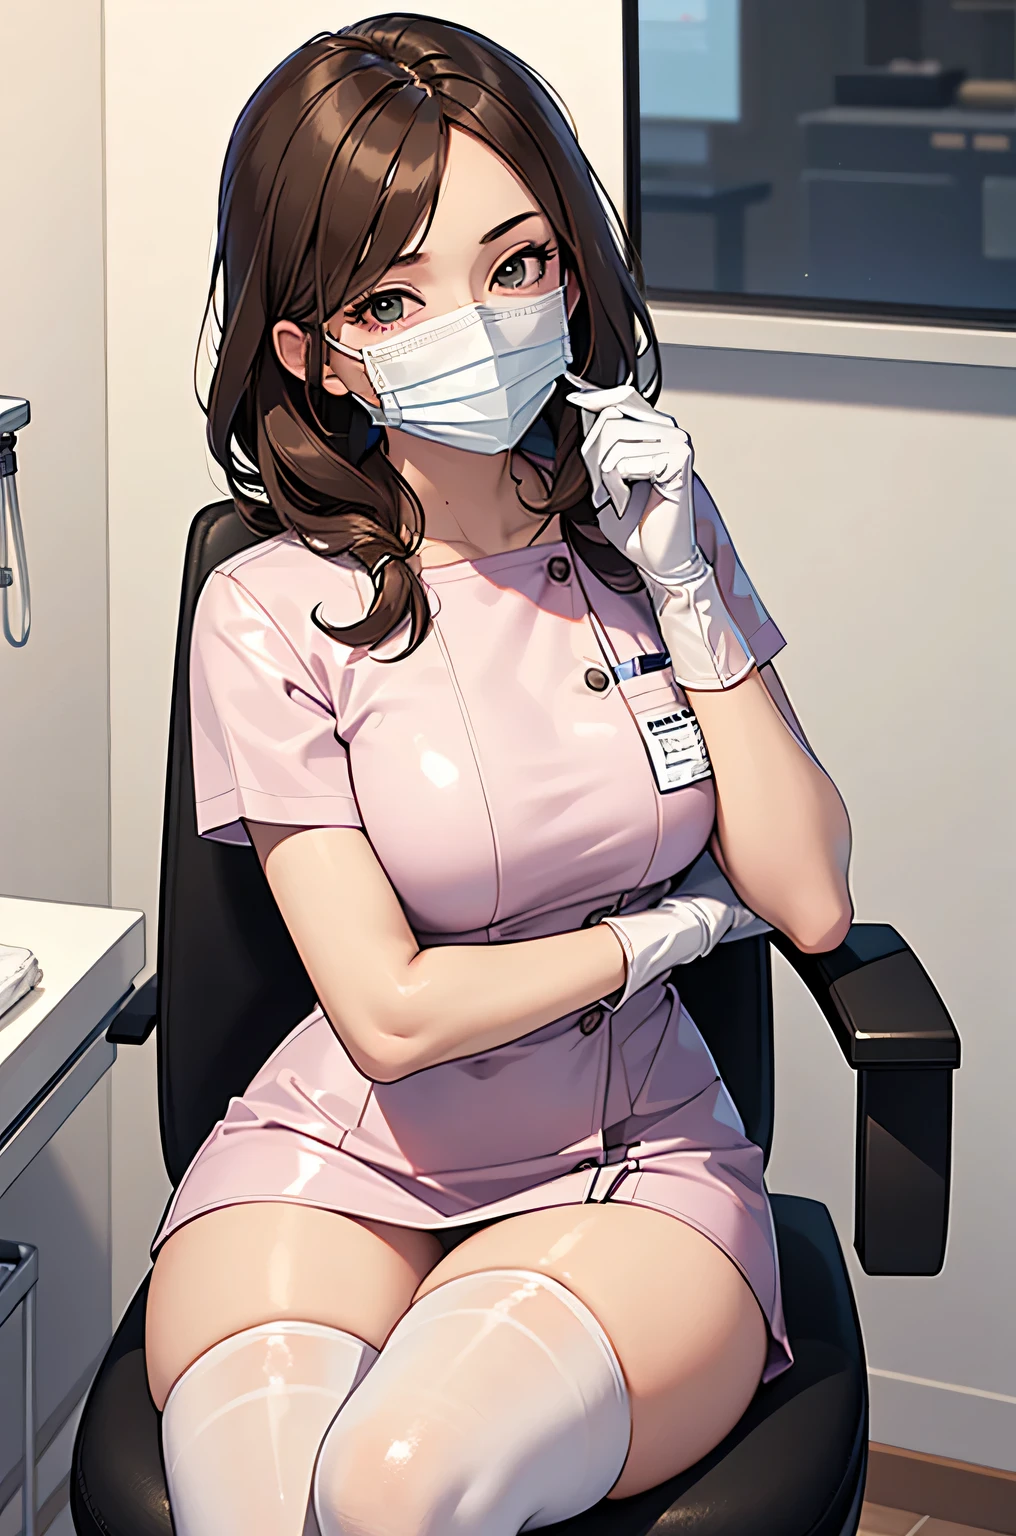 1 girl, brown hair, Dental Hygienist, pink medical scrub, White latex gloves, white stockings, ((White surgical mask, Covered nose)), sitting in a chair, Dental clinic, highest quality, masterpiece